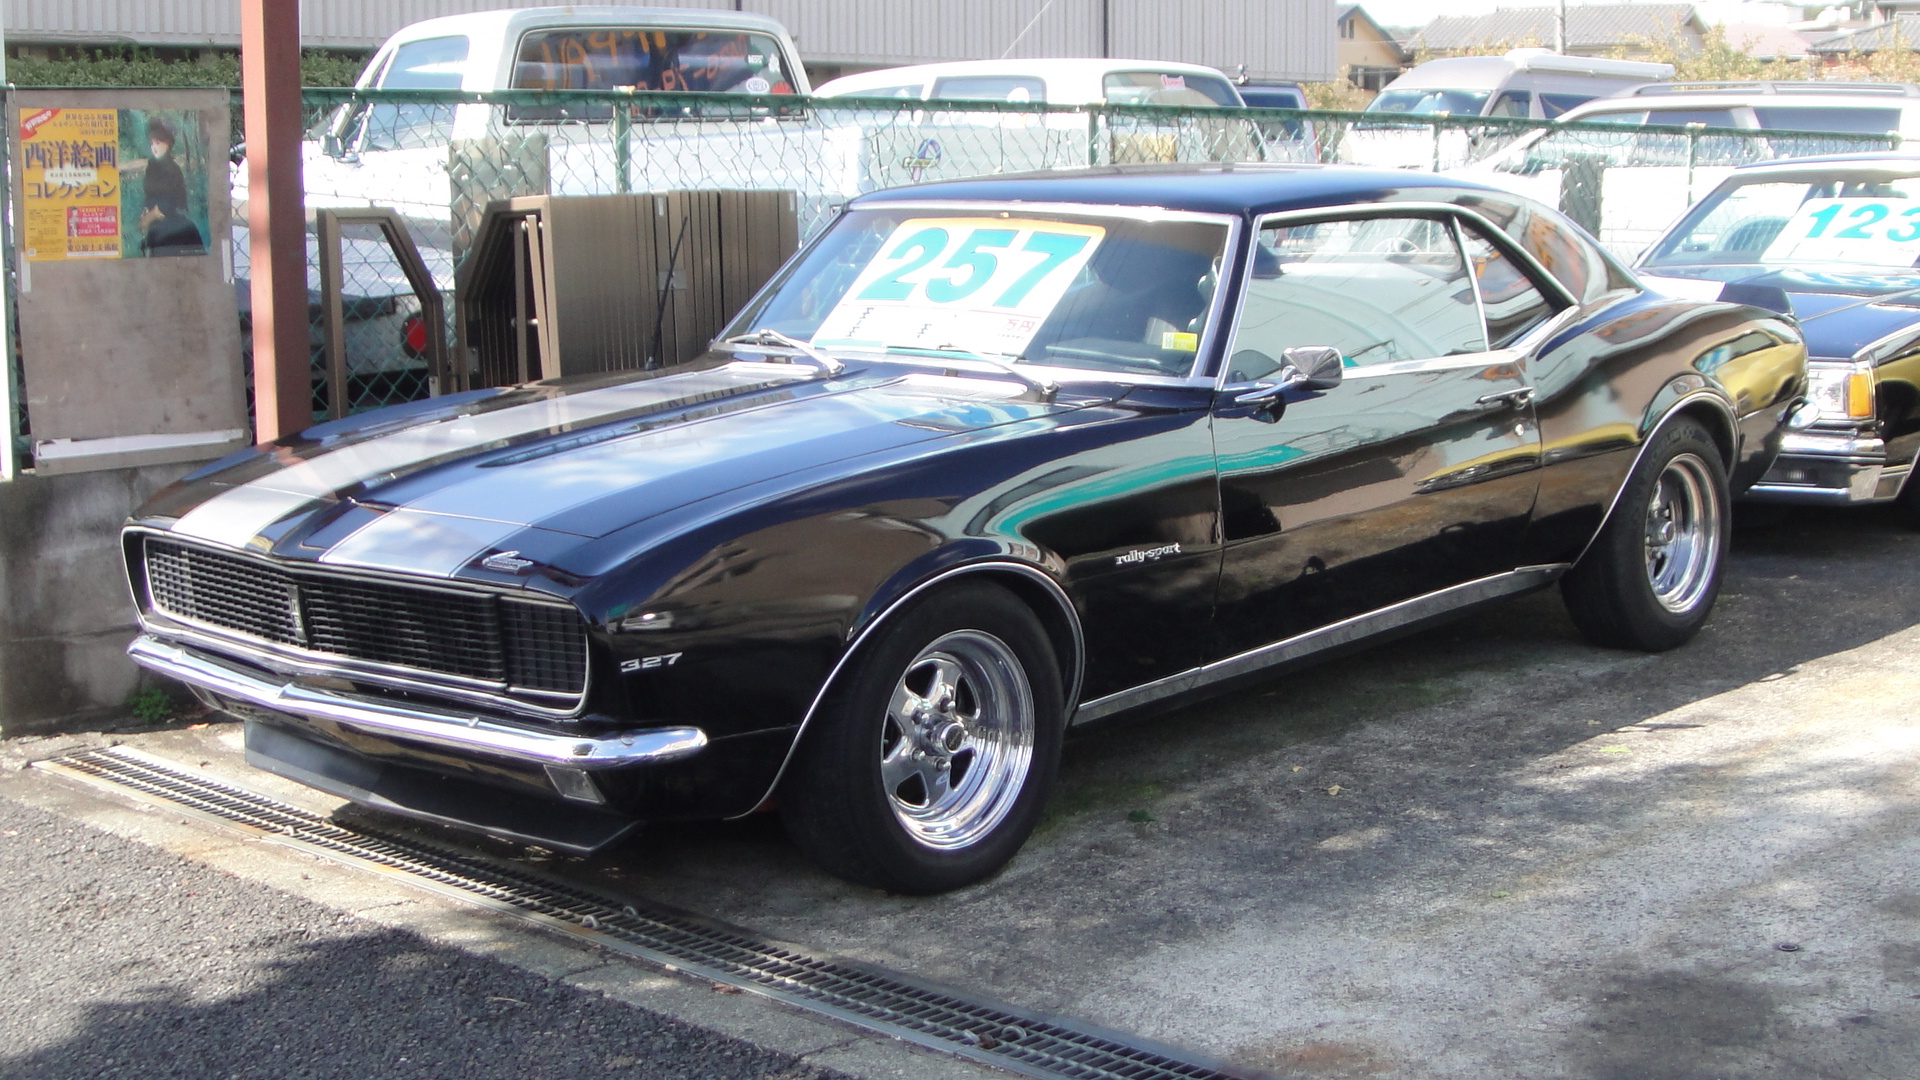 File:1968 Chevrolet Camaro first Generation  - Wikimedia Commons